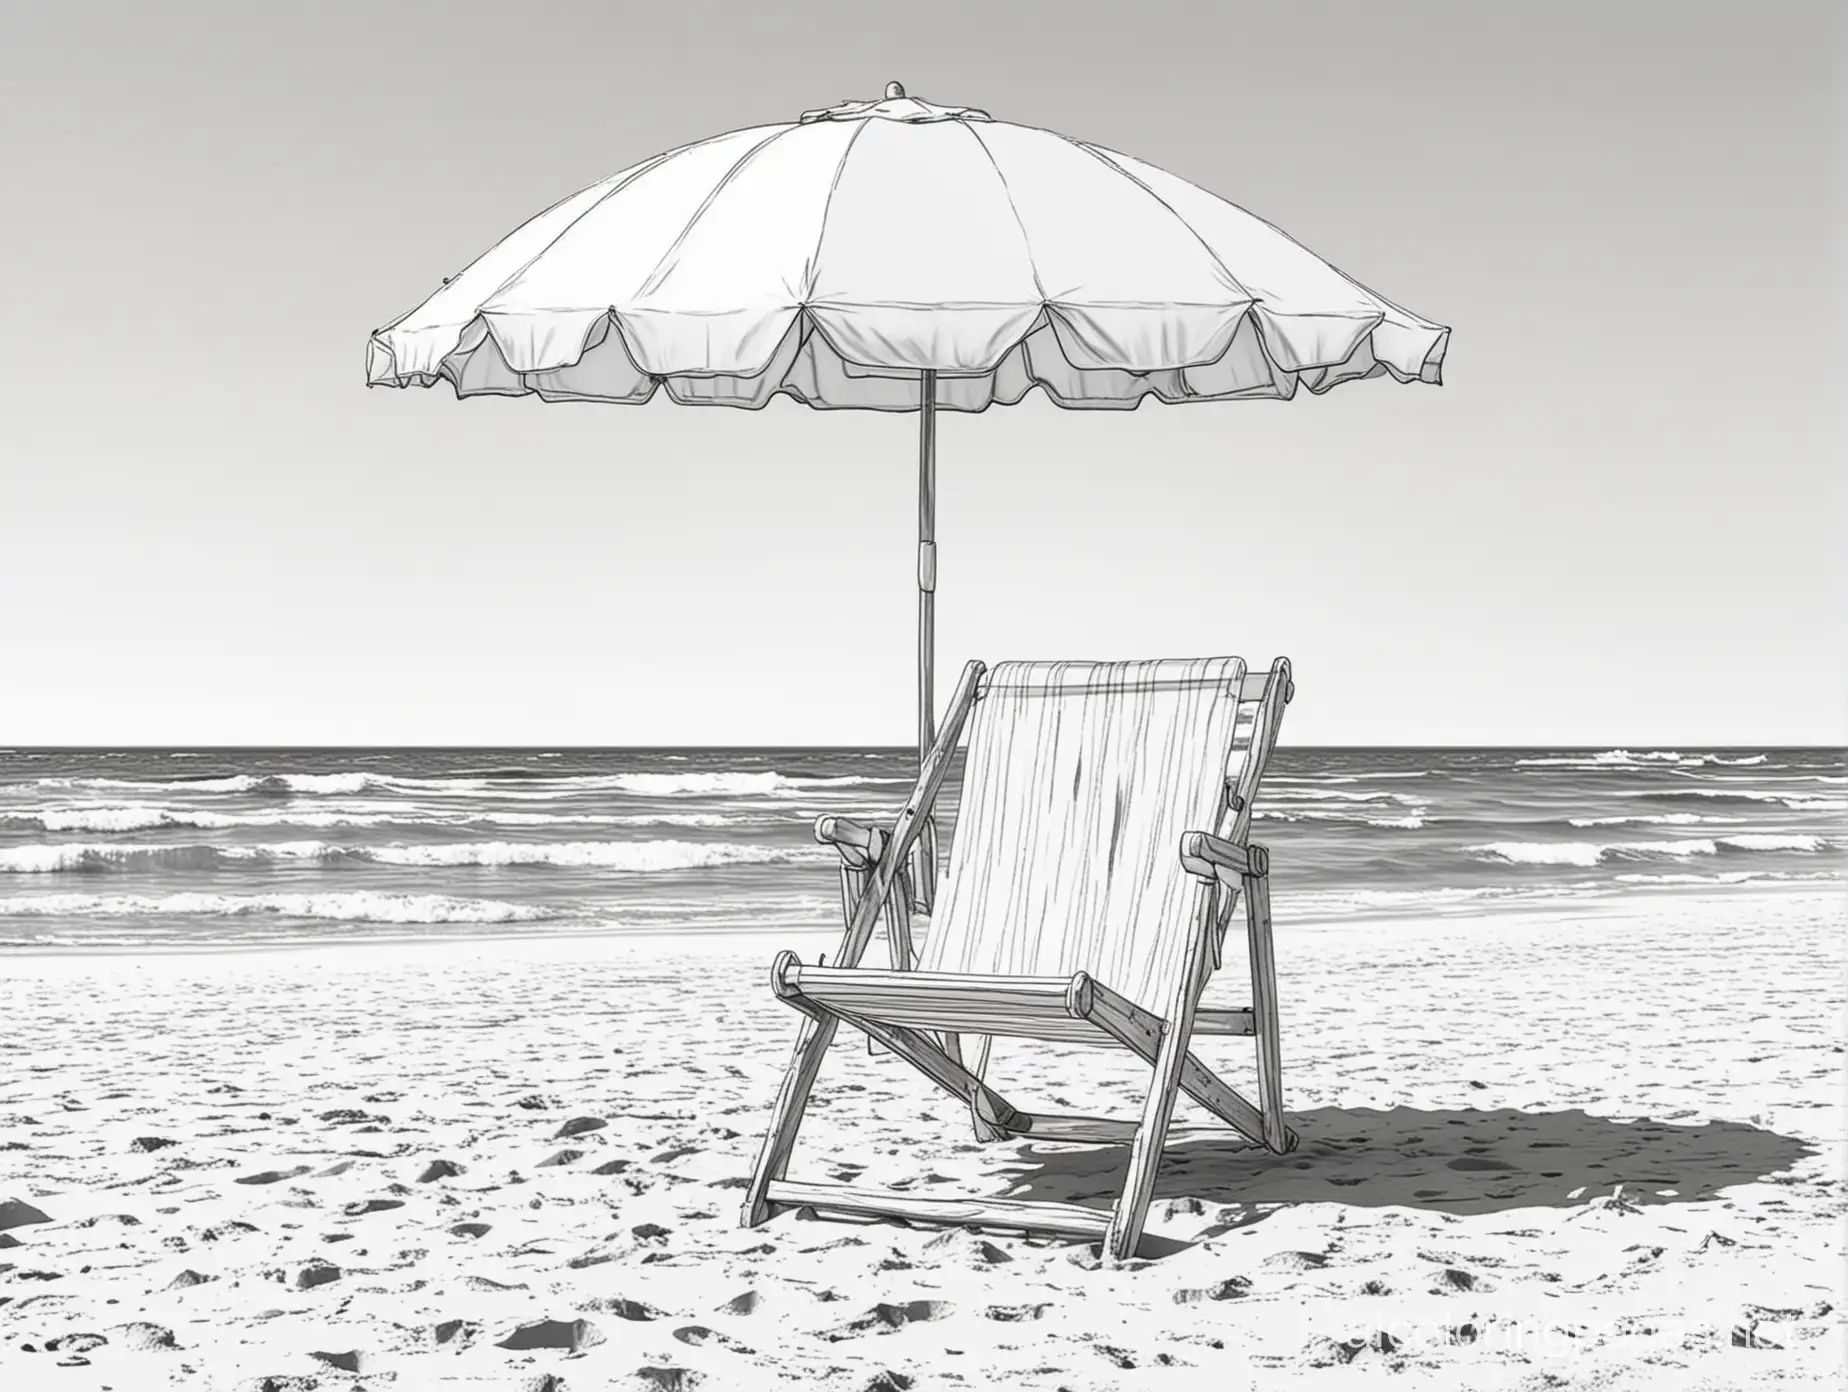 Beach Umbrella and Chair, Coloring Page, black and white, line art, white background, Simplicity, Ample White Space. The background of the coloring page is plain white to make it easy for young children to color within the lines. The outlines of all the subjects are easy to distinguish, making it simple for kids to color without too much difficulty